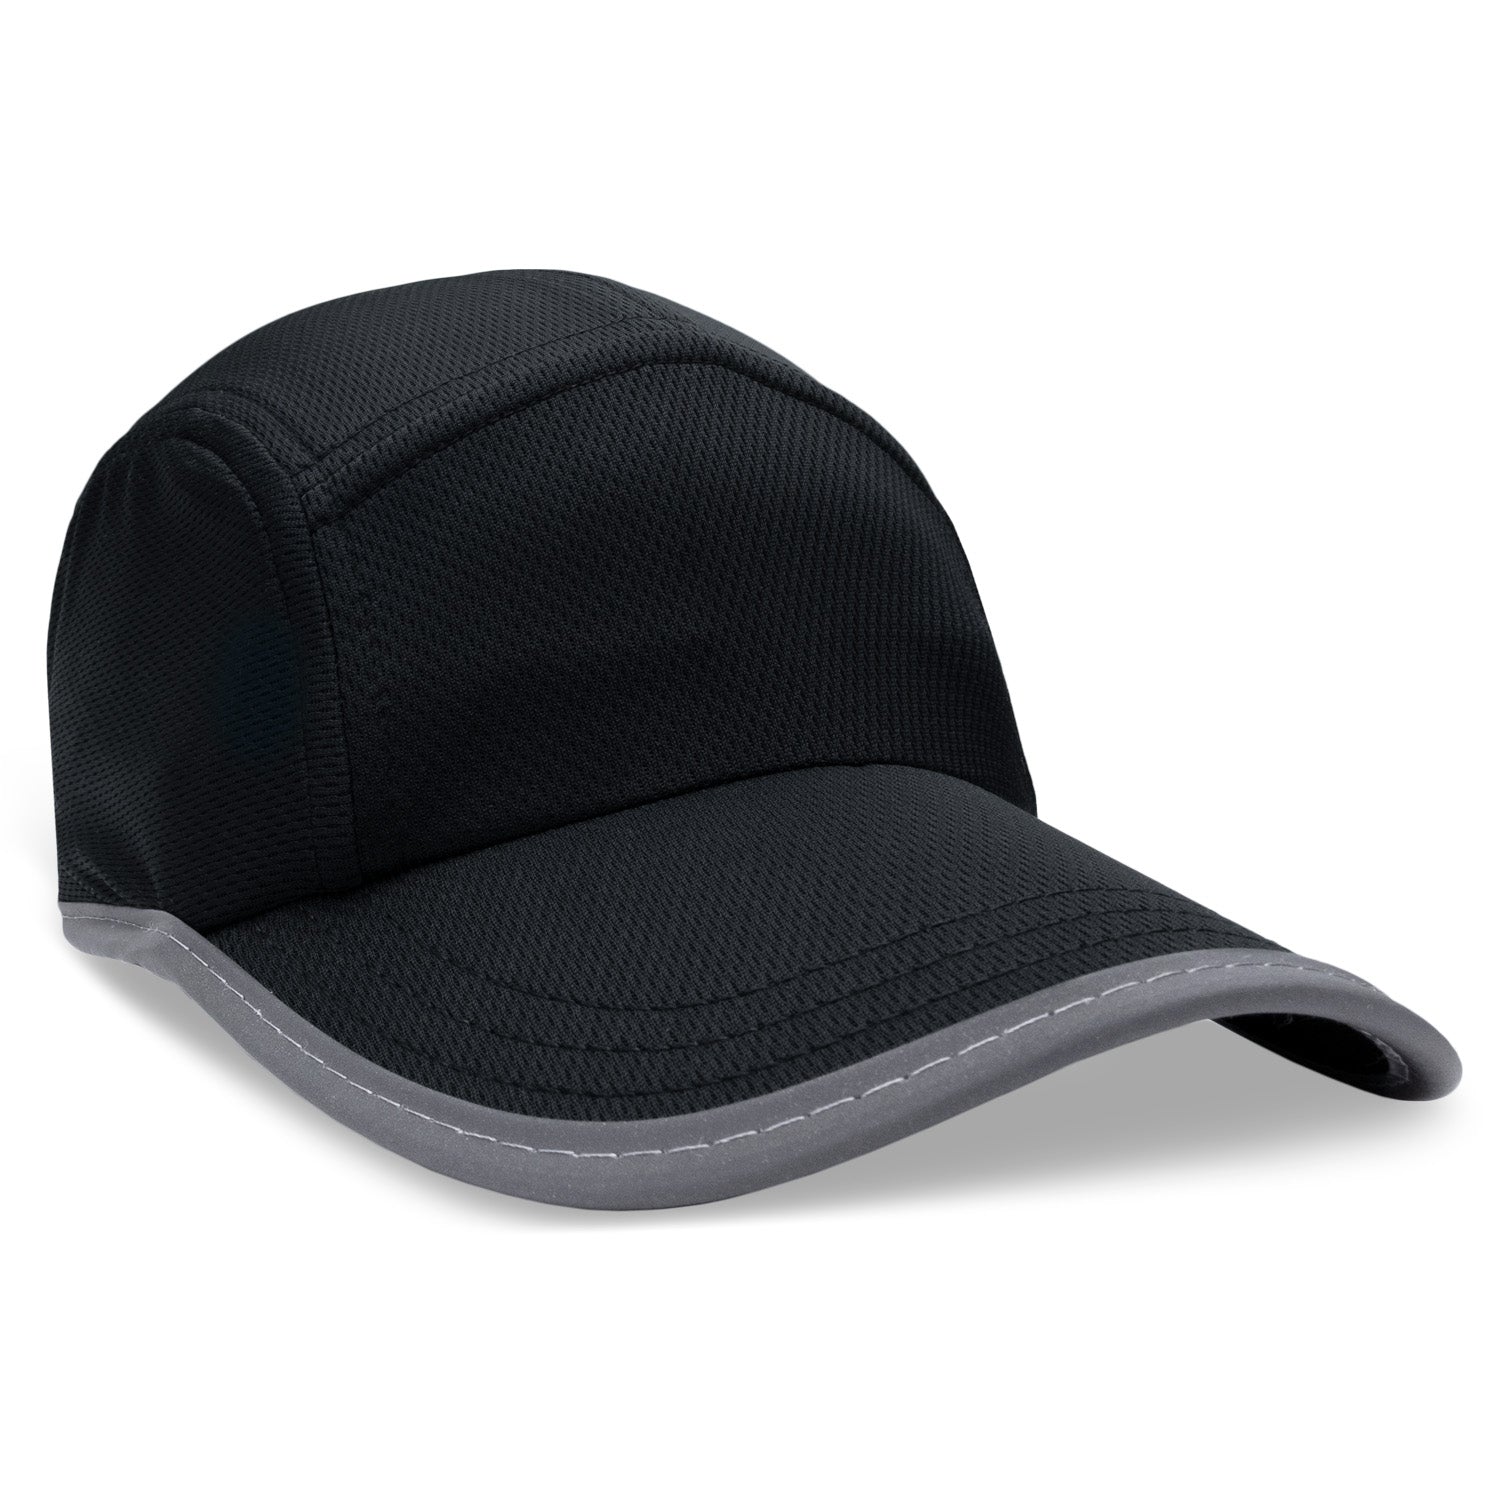 Headsweats Performance Reflective Race Hat Baseball Cap for Running and Outdoor Lifestyle